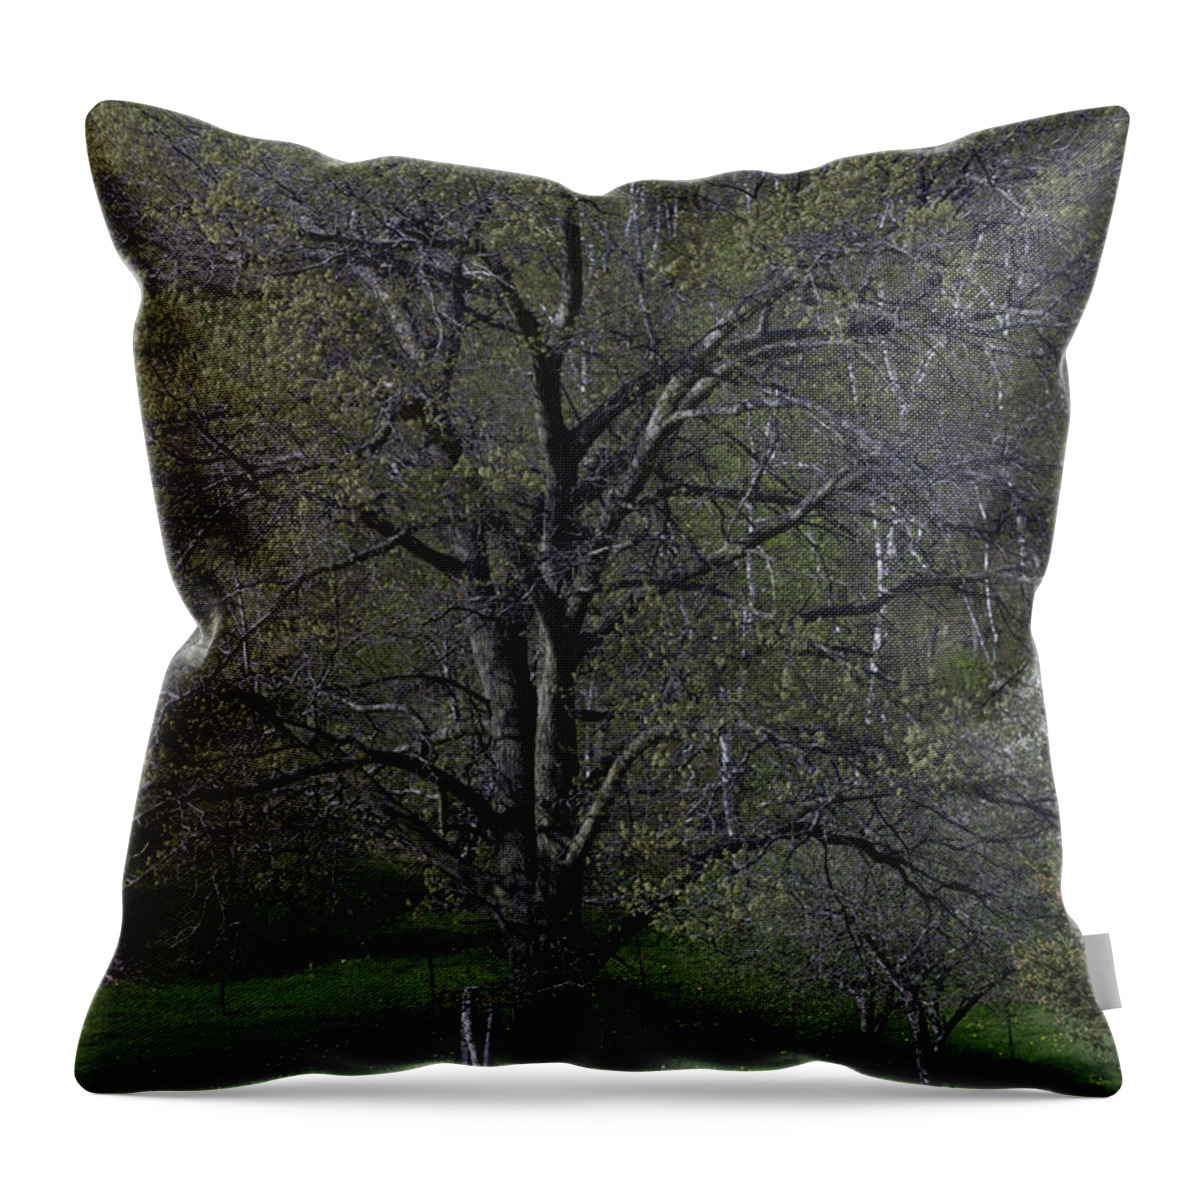 Green Throw Pillow featuring the photograph Tree by Michelle Hoffmann